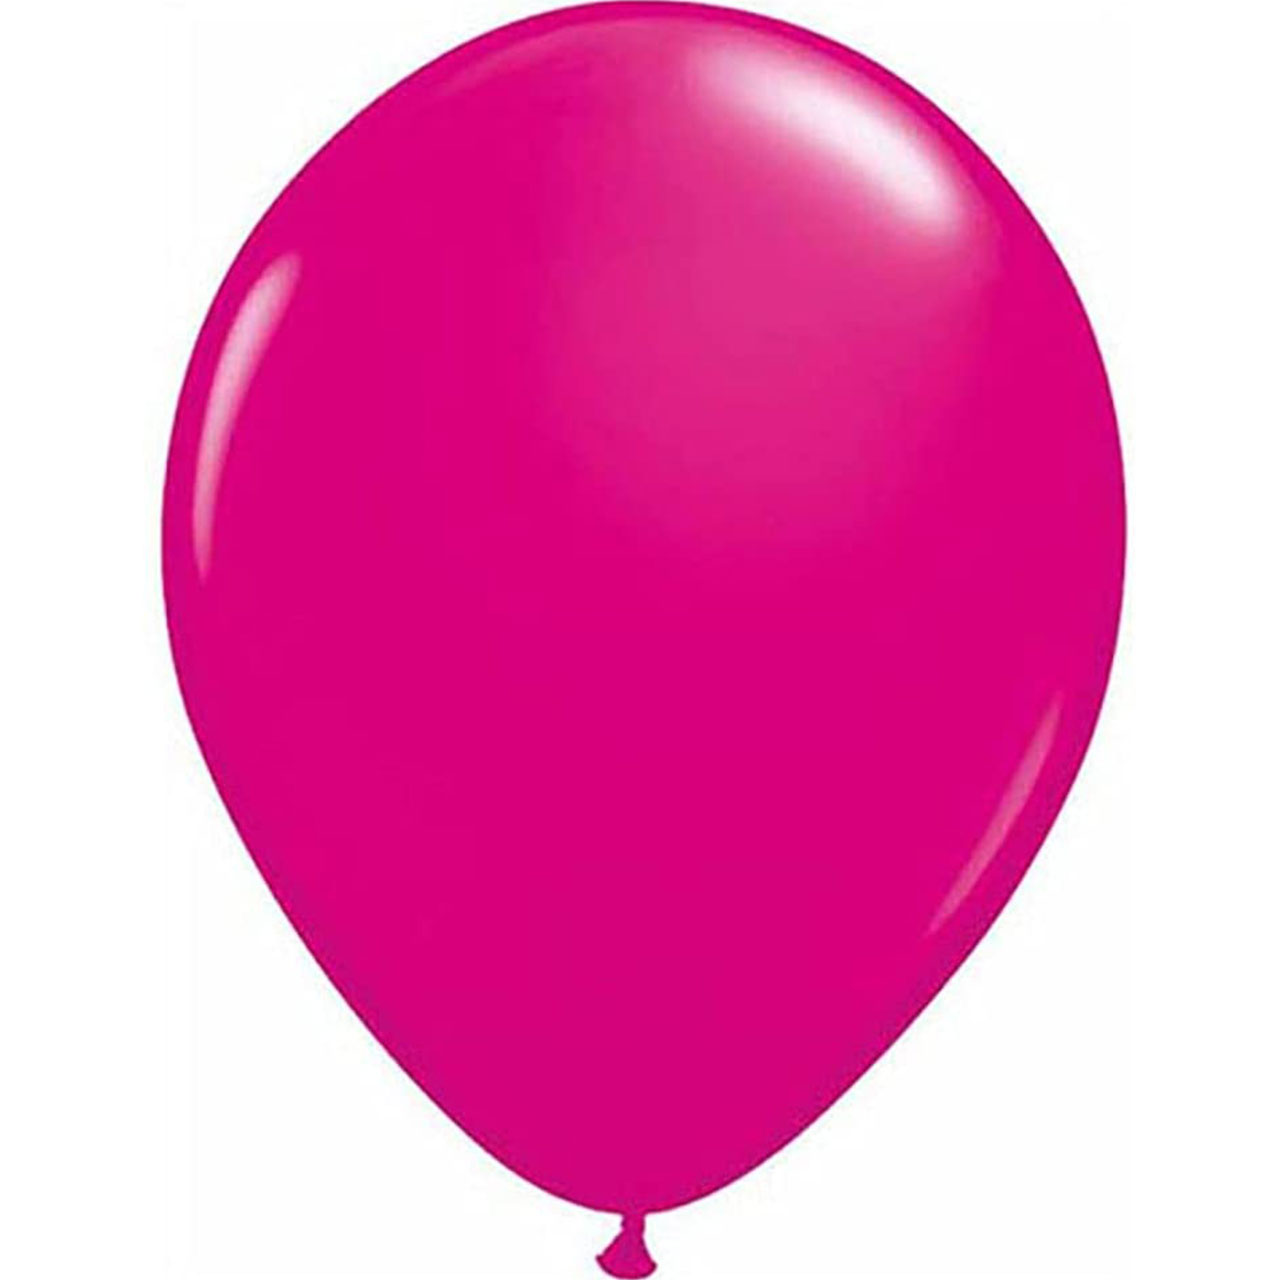 3 Ballons Wild Berry - Large